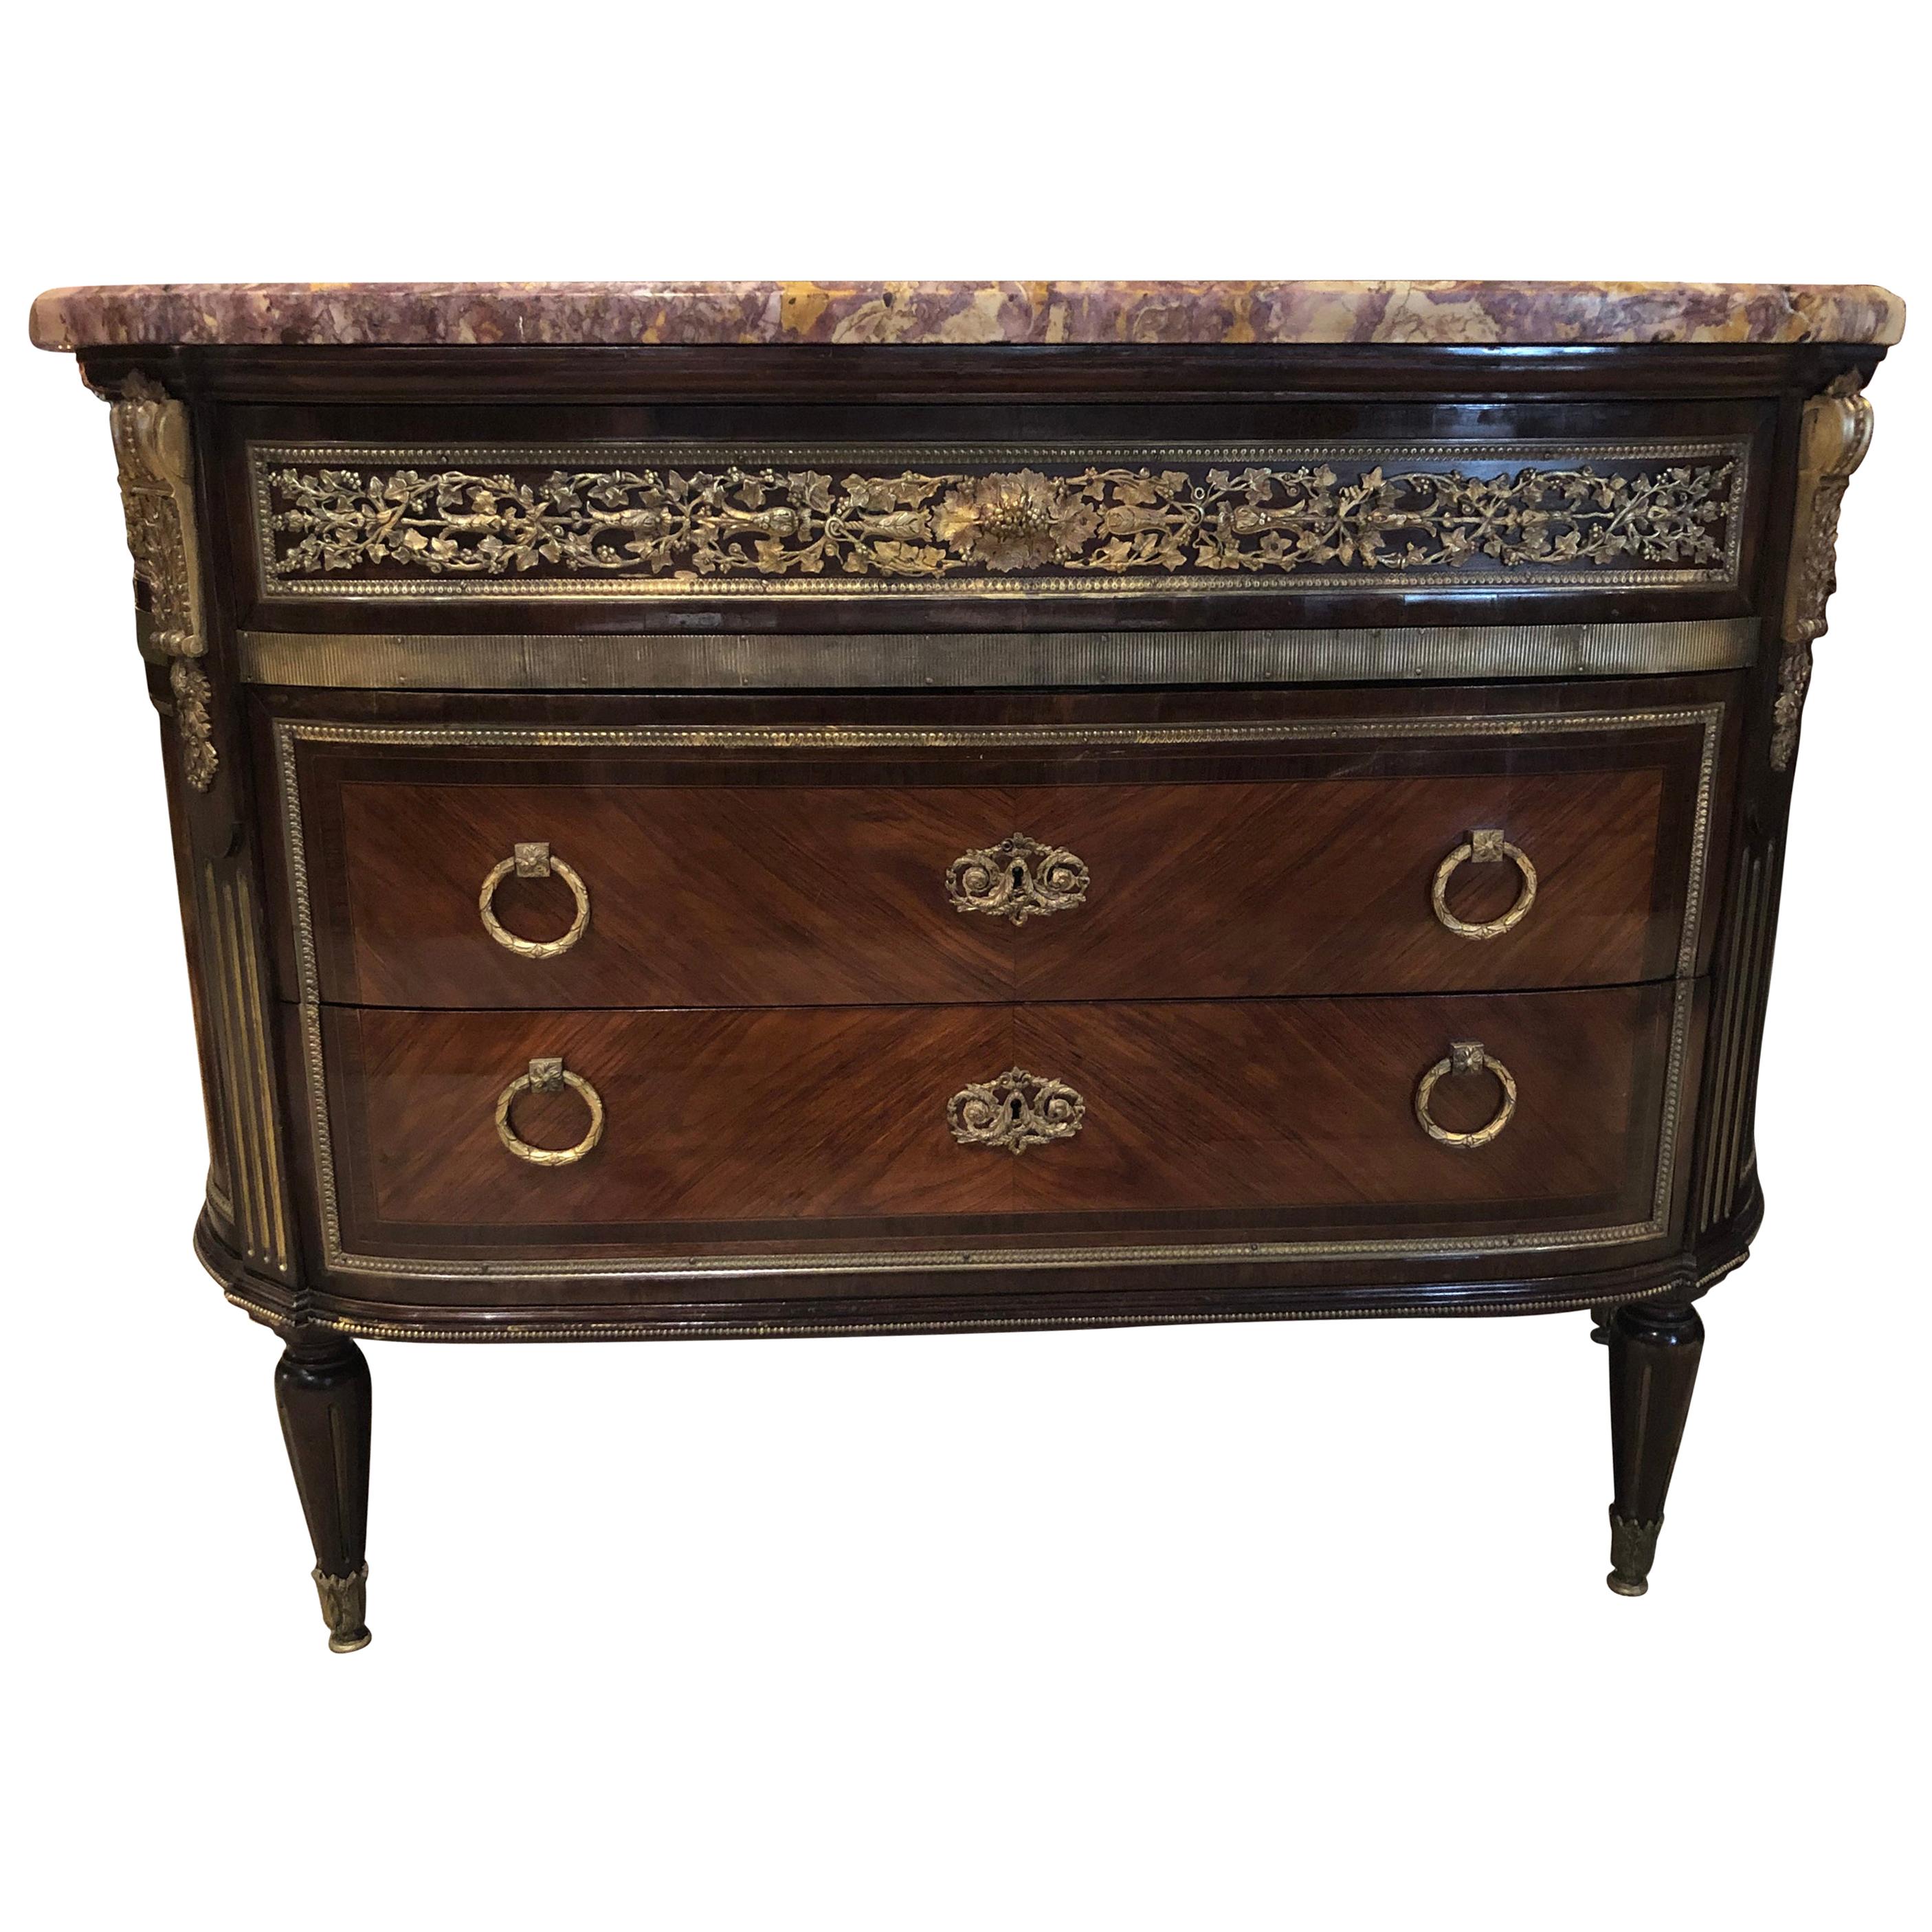 Louis XVI Style Gilt Bronze Mounted Commode 19th Century Marble Top For Sale